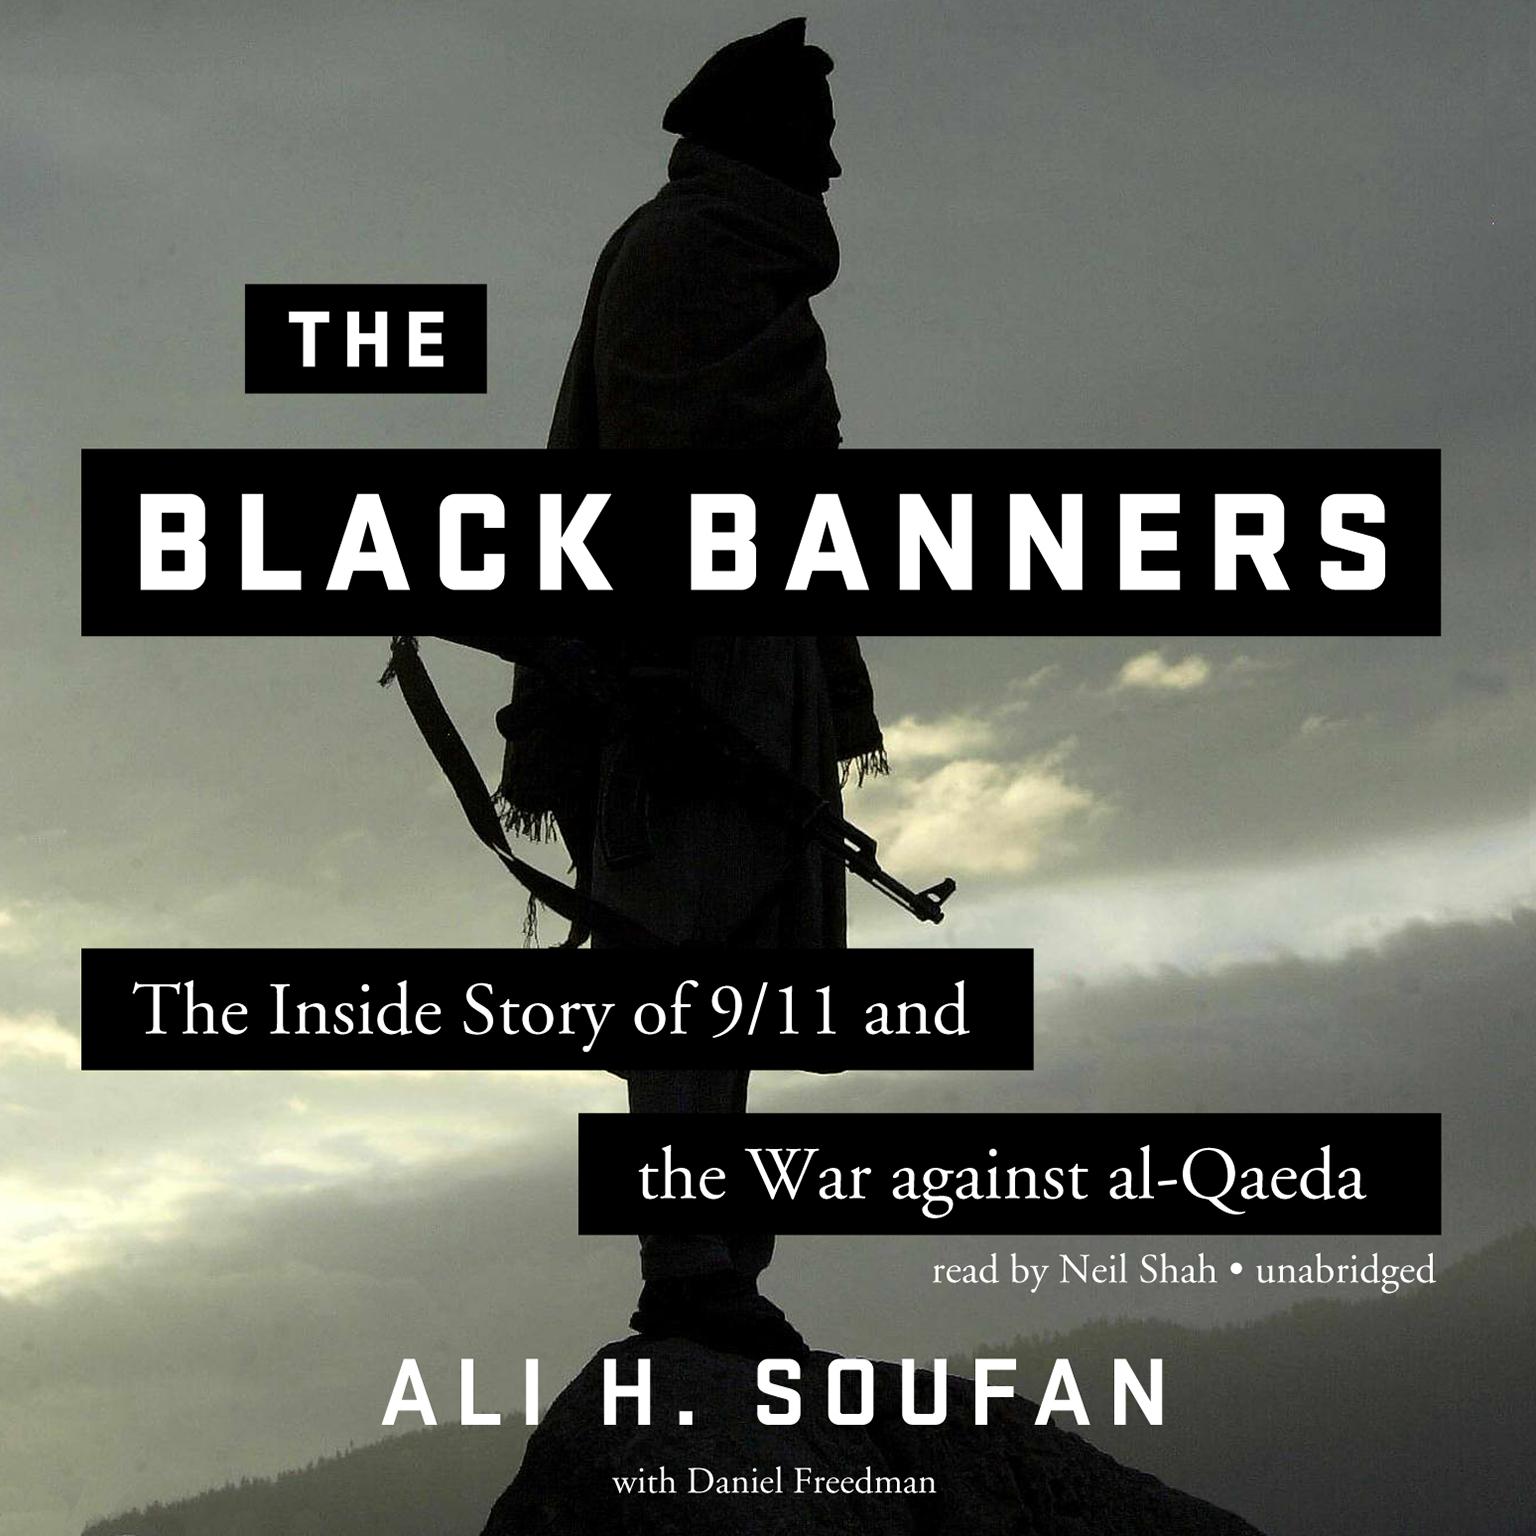 The Black Banners: The Inside Story of 9/11 and the War against al-Qaeda Audiobook, by Ali H. Soufan